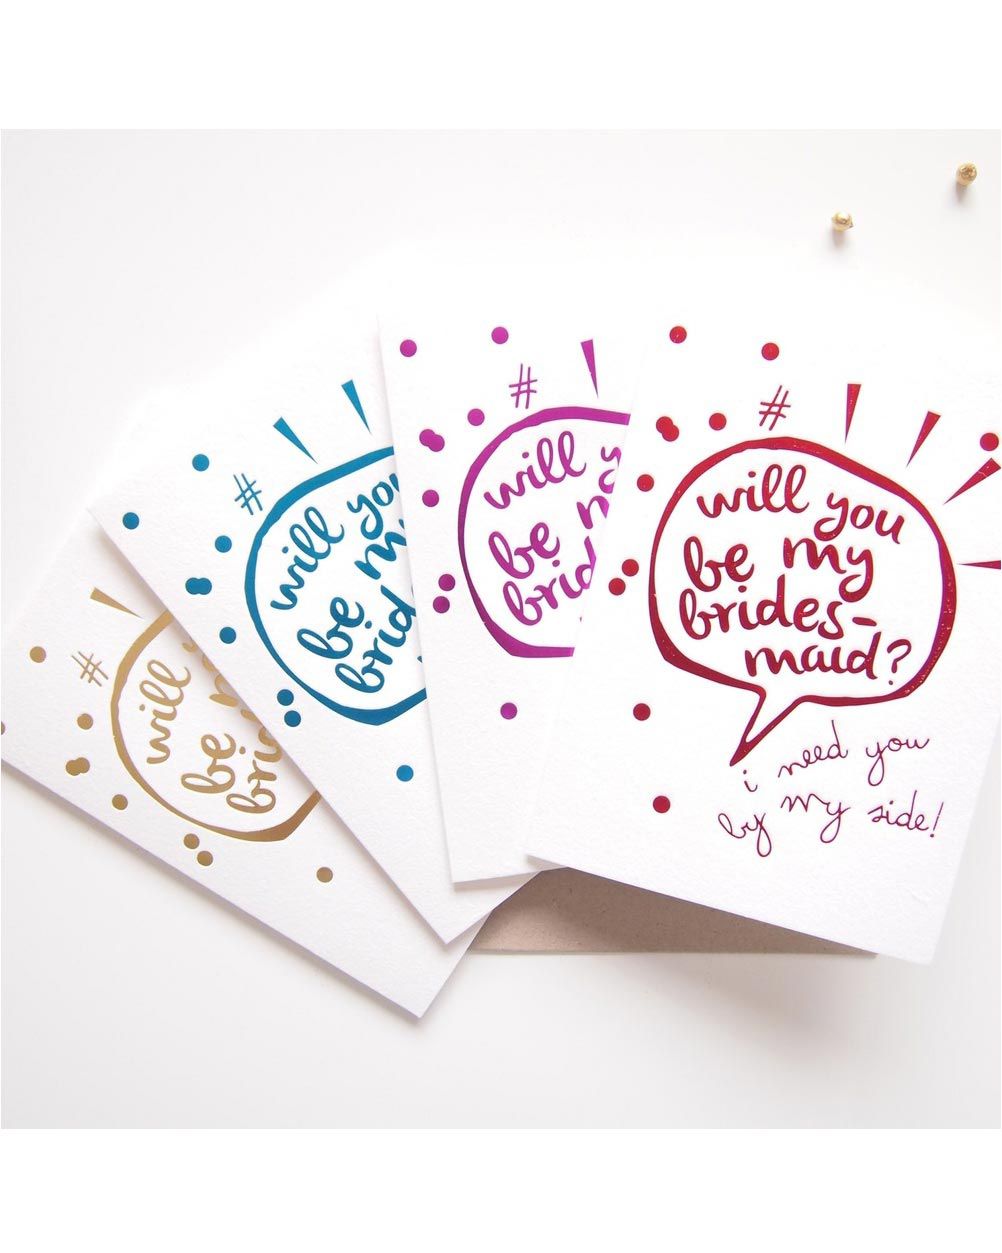 maytide-stationery-will-you-be-my-bridesmaid-card-0216.jpg